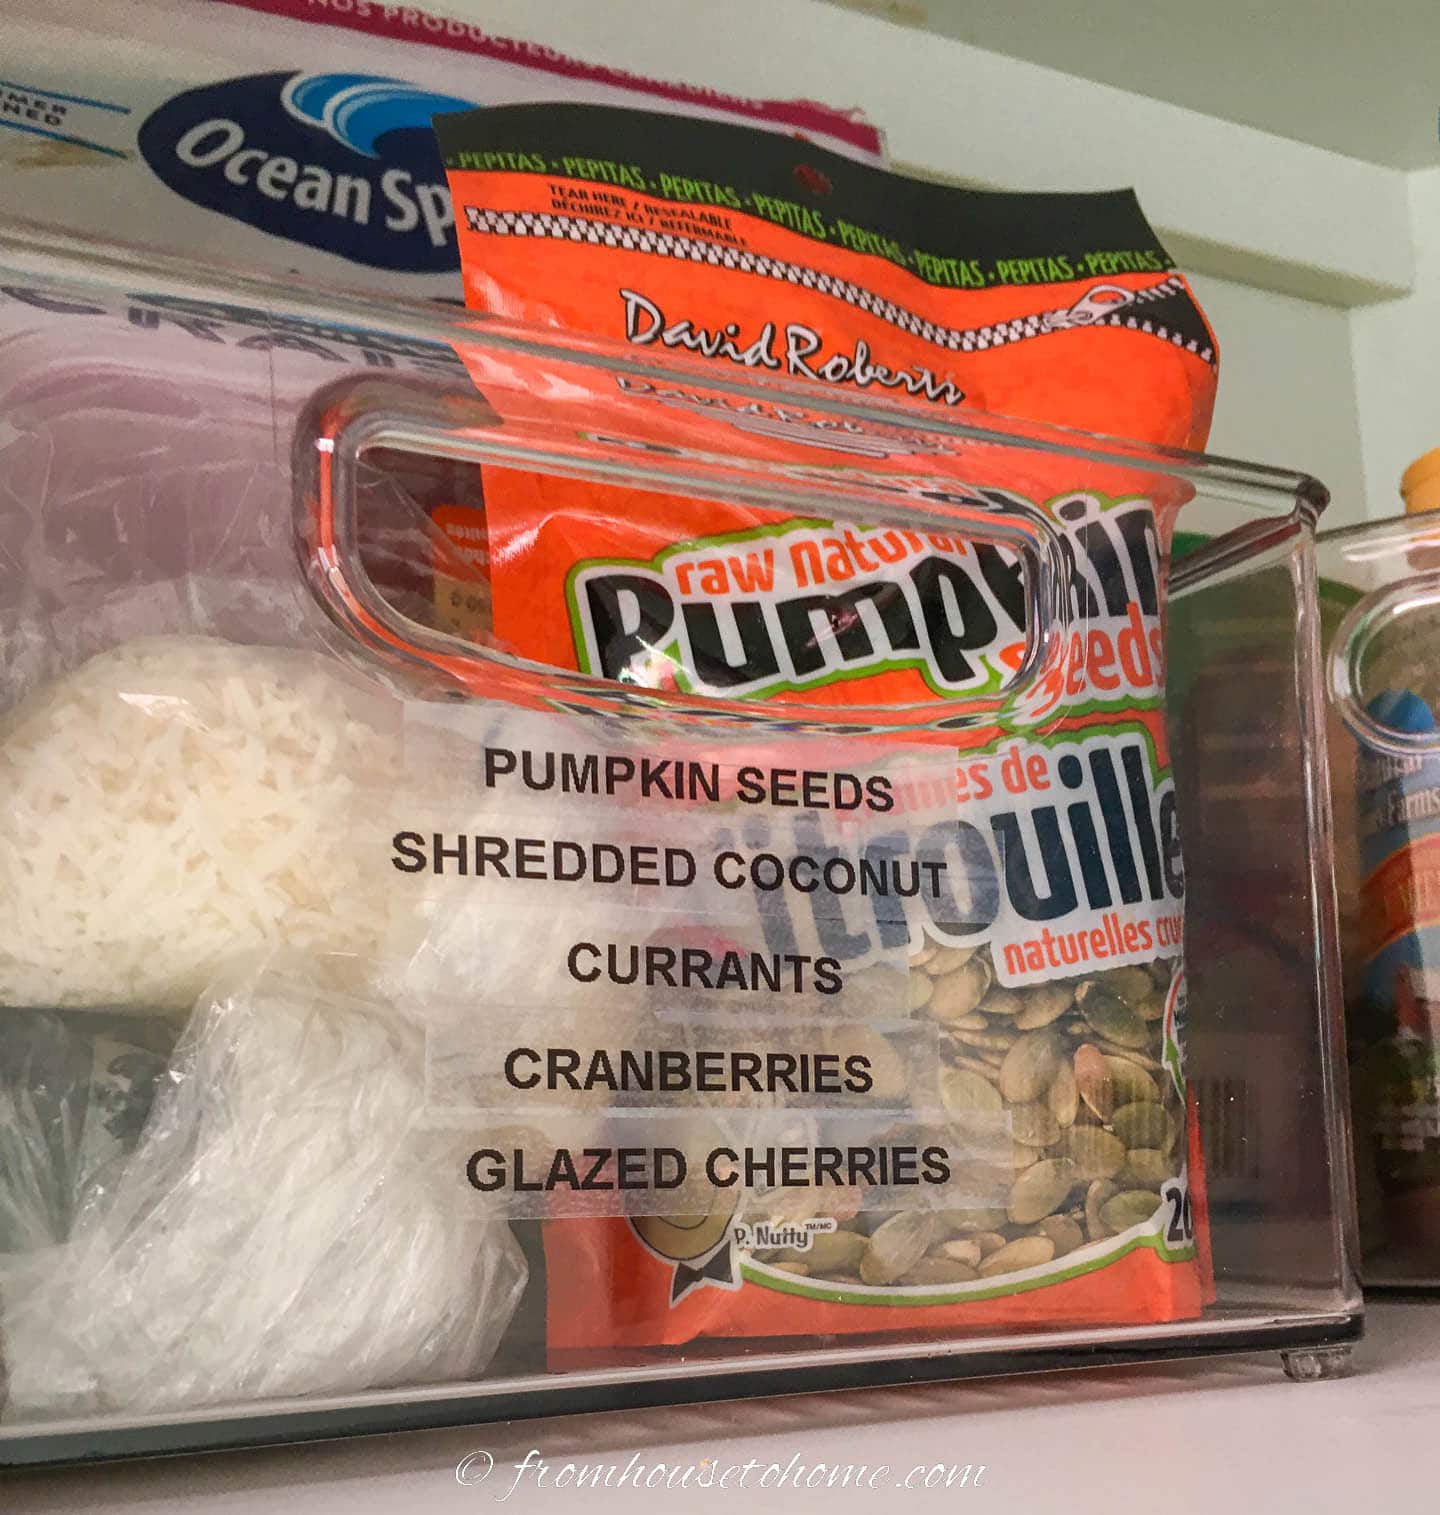 Baking supplies stored in a plastic container with labels on the front